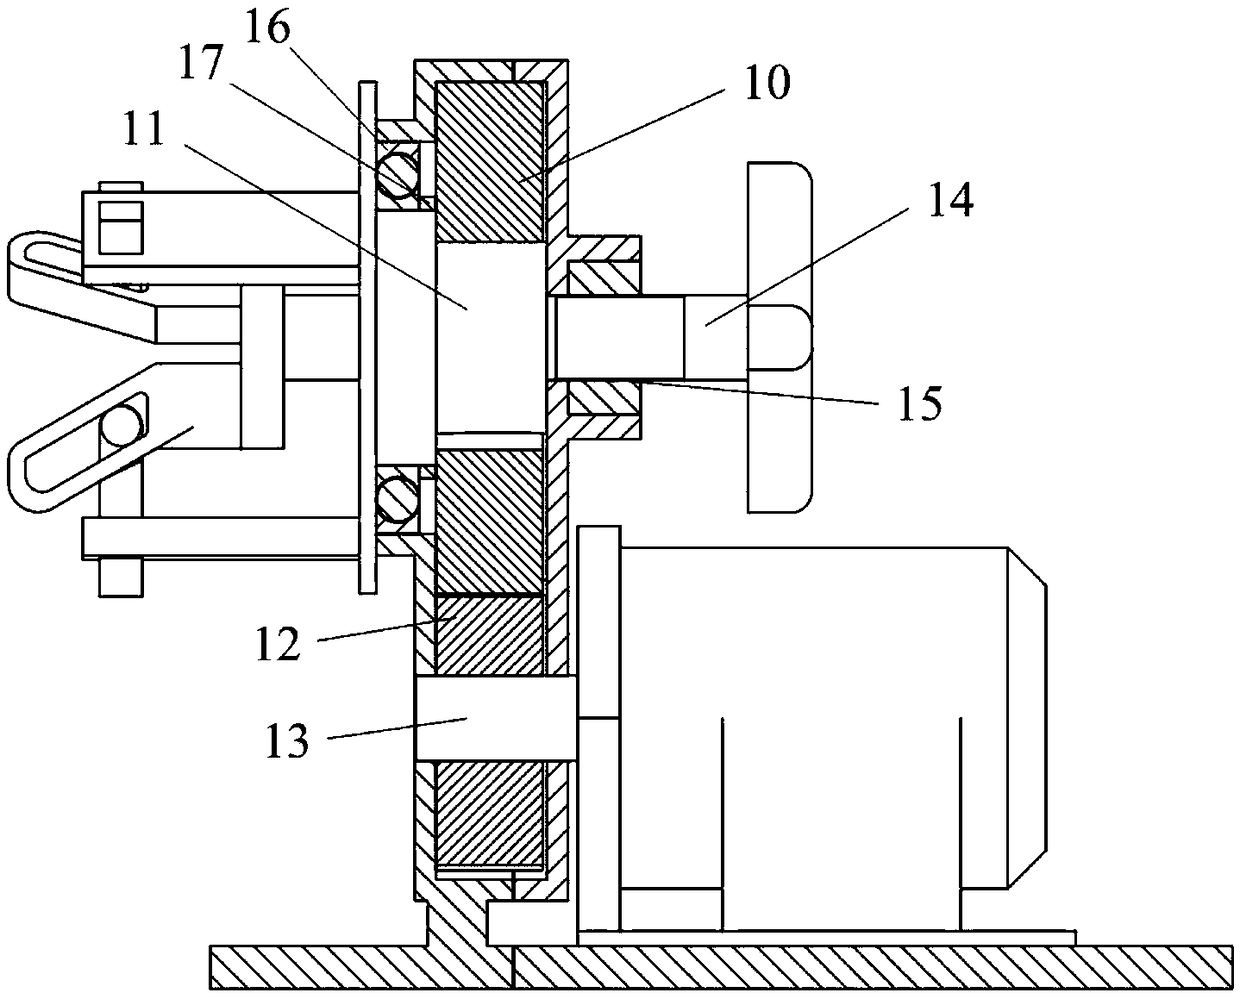 Centering and clamping device for multi-diameter pipe